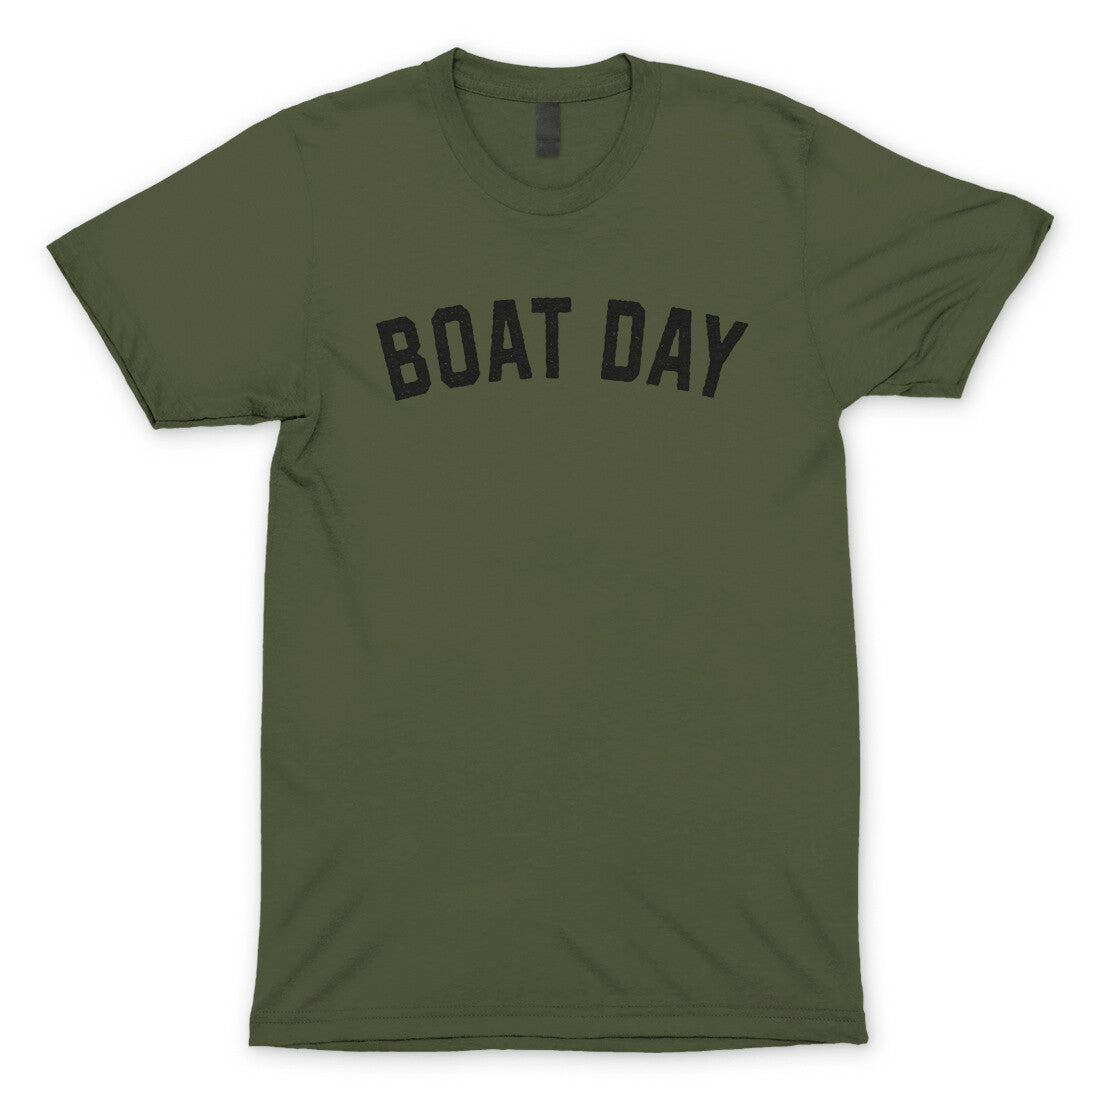 Boat Day in Military Green Color